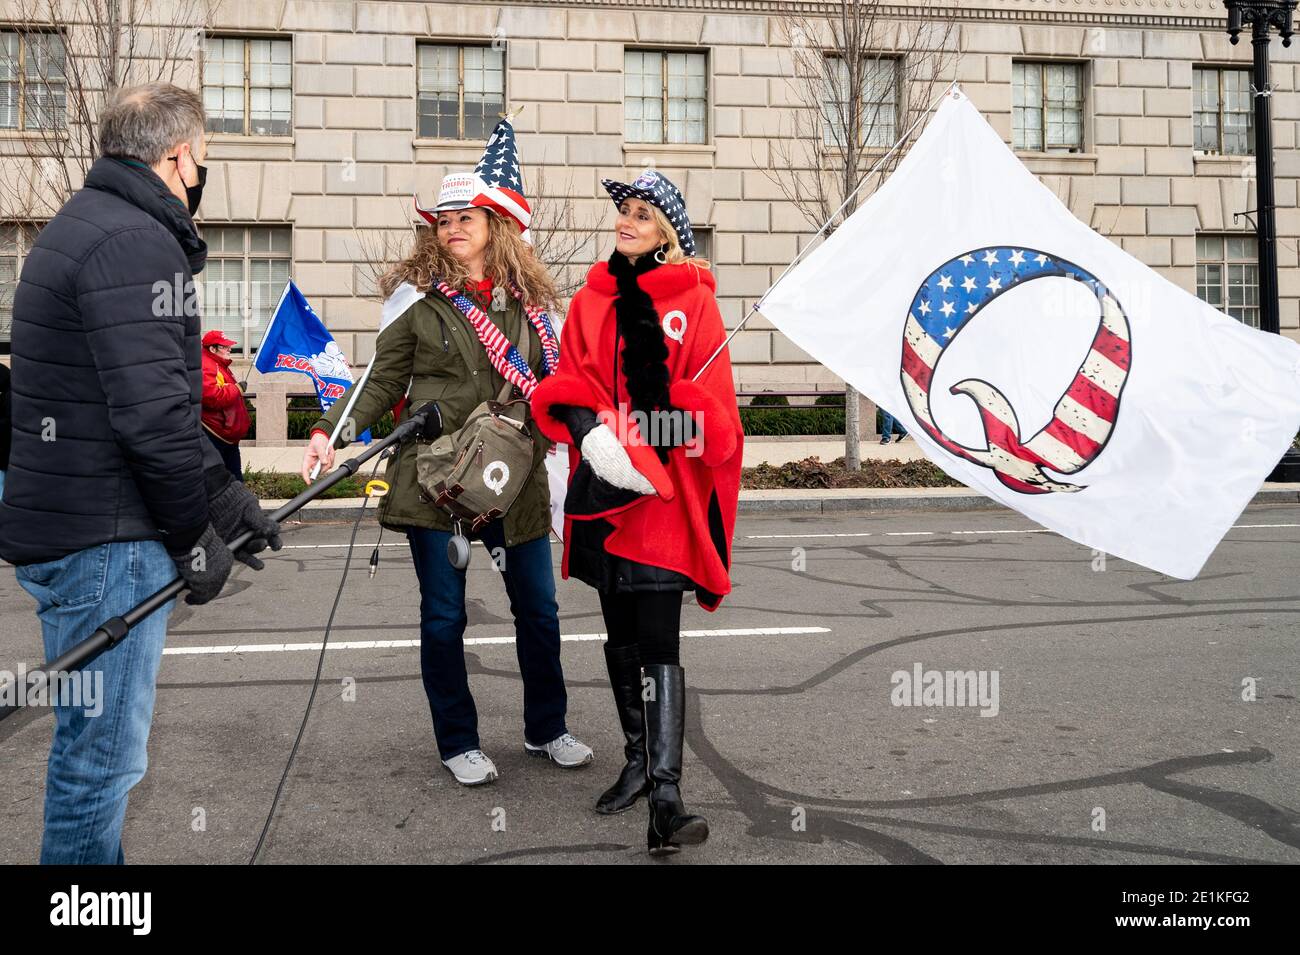 Two women wearing Qanon outfits and flag speak to a reporter during a Trump Rally in Washington, DC Stock Photo